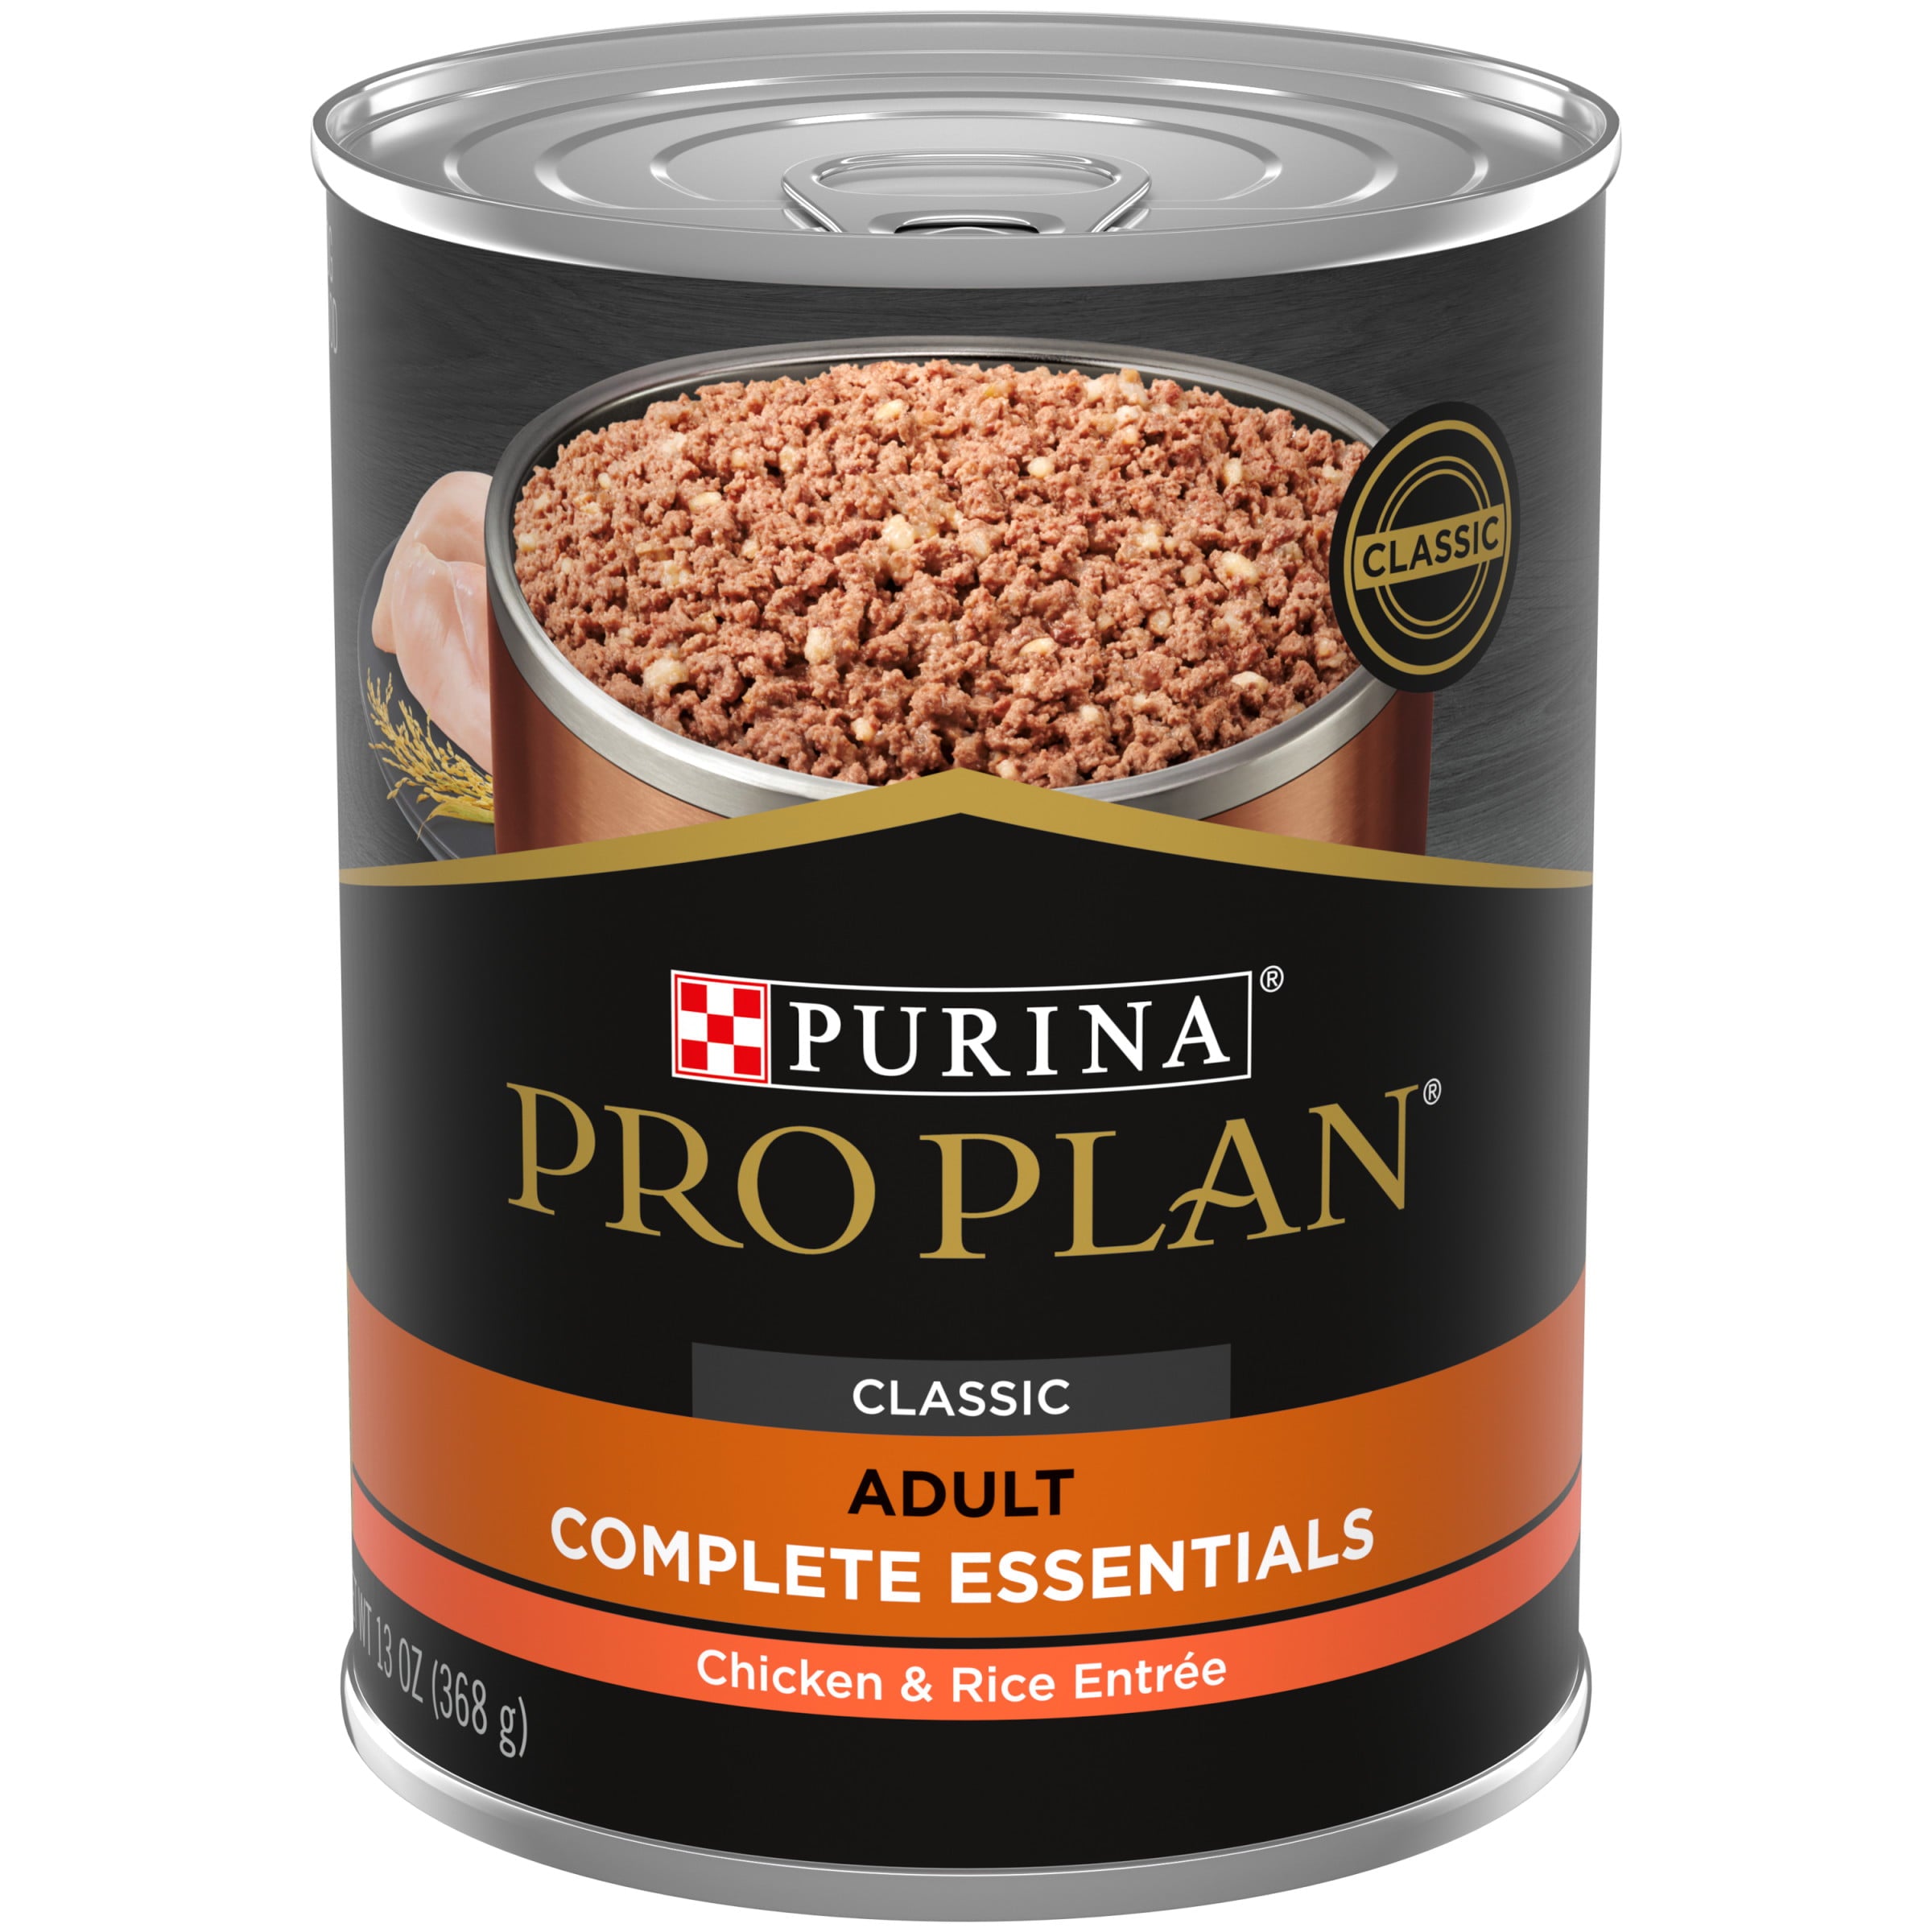 (12 Pack) Purina Pro Plan High Protein Dog Food Wet Pate, Chicken and Rice Entree, 13 oz. Cans